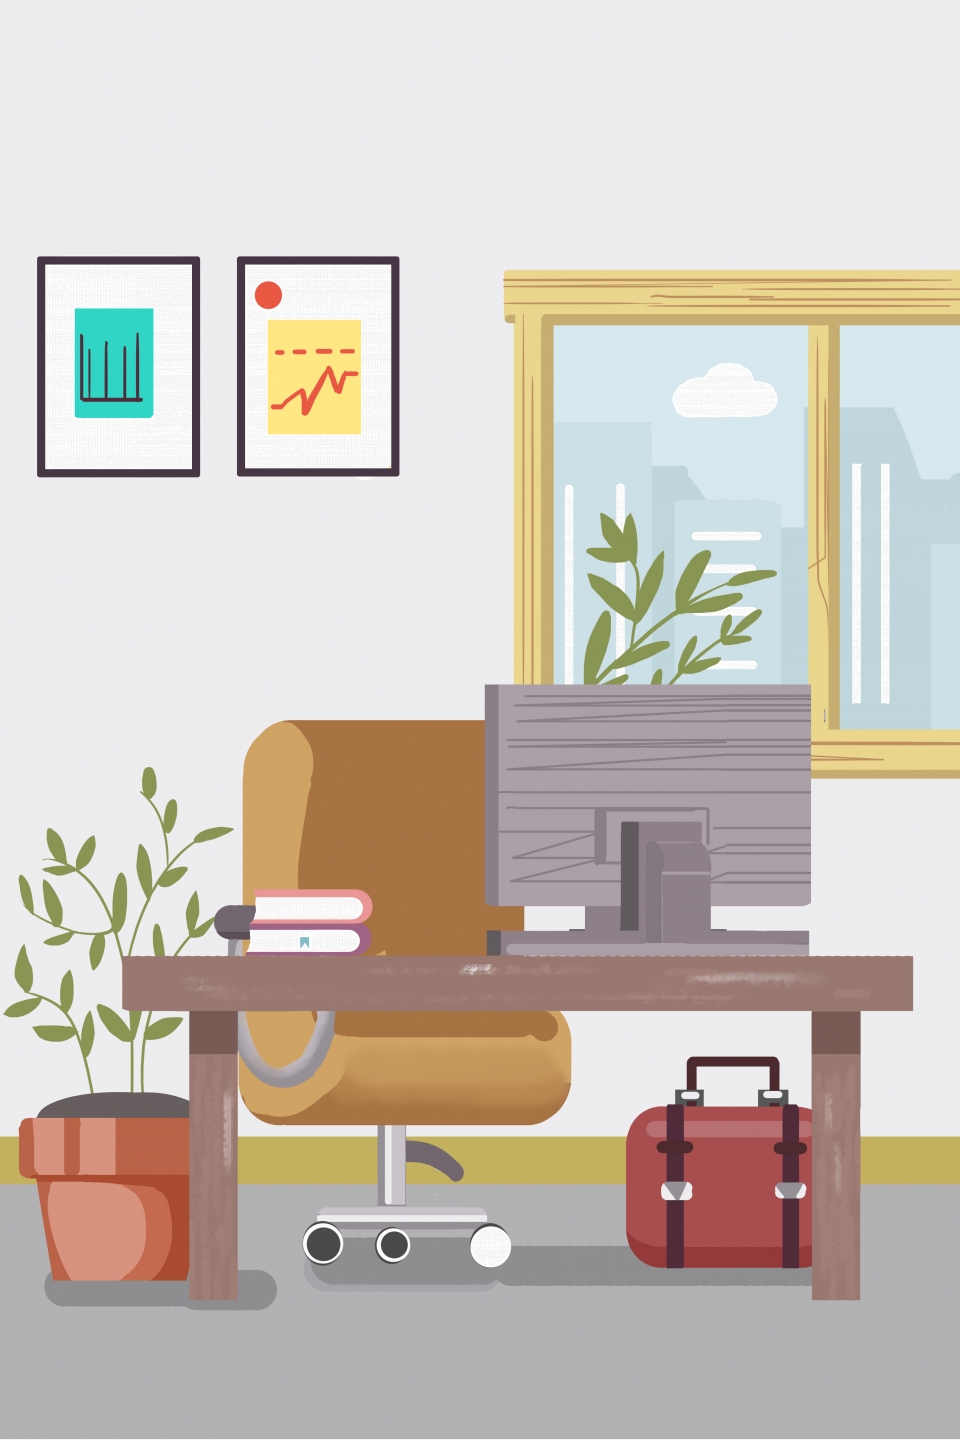 Office clipart office room Office office room Transparent FREE for download on WebStockReview 2021